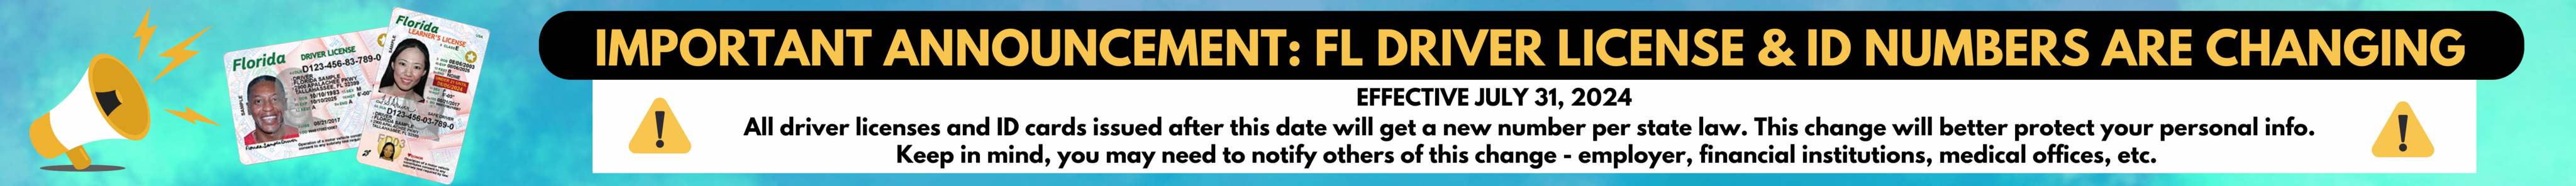 Important announcement - Florida driver license and ID numbers are changing. Effective July 31, 2024 - All driver licenses and ID cards issued after this date will get a new number per state law. This change will better protect your personal info. Keep in mind, you may need to notify others of this change - employer, financial institutions, medical offices, etc.